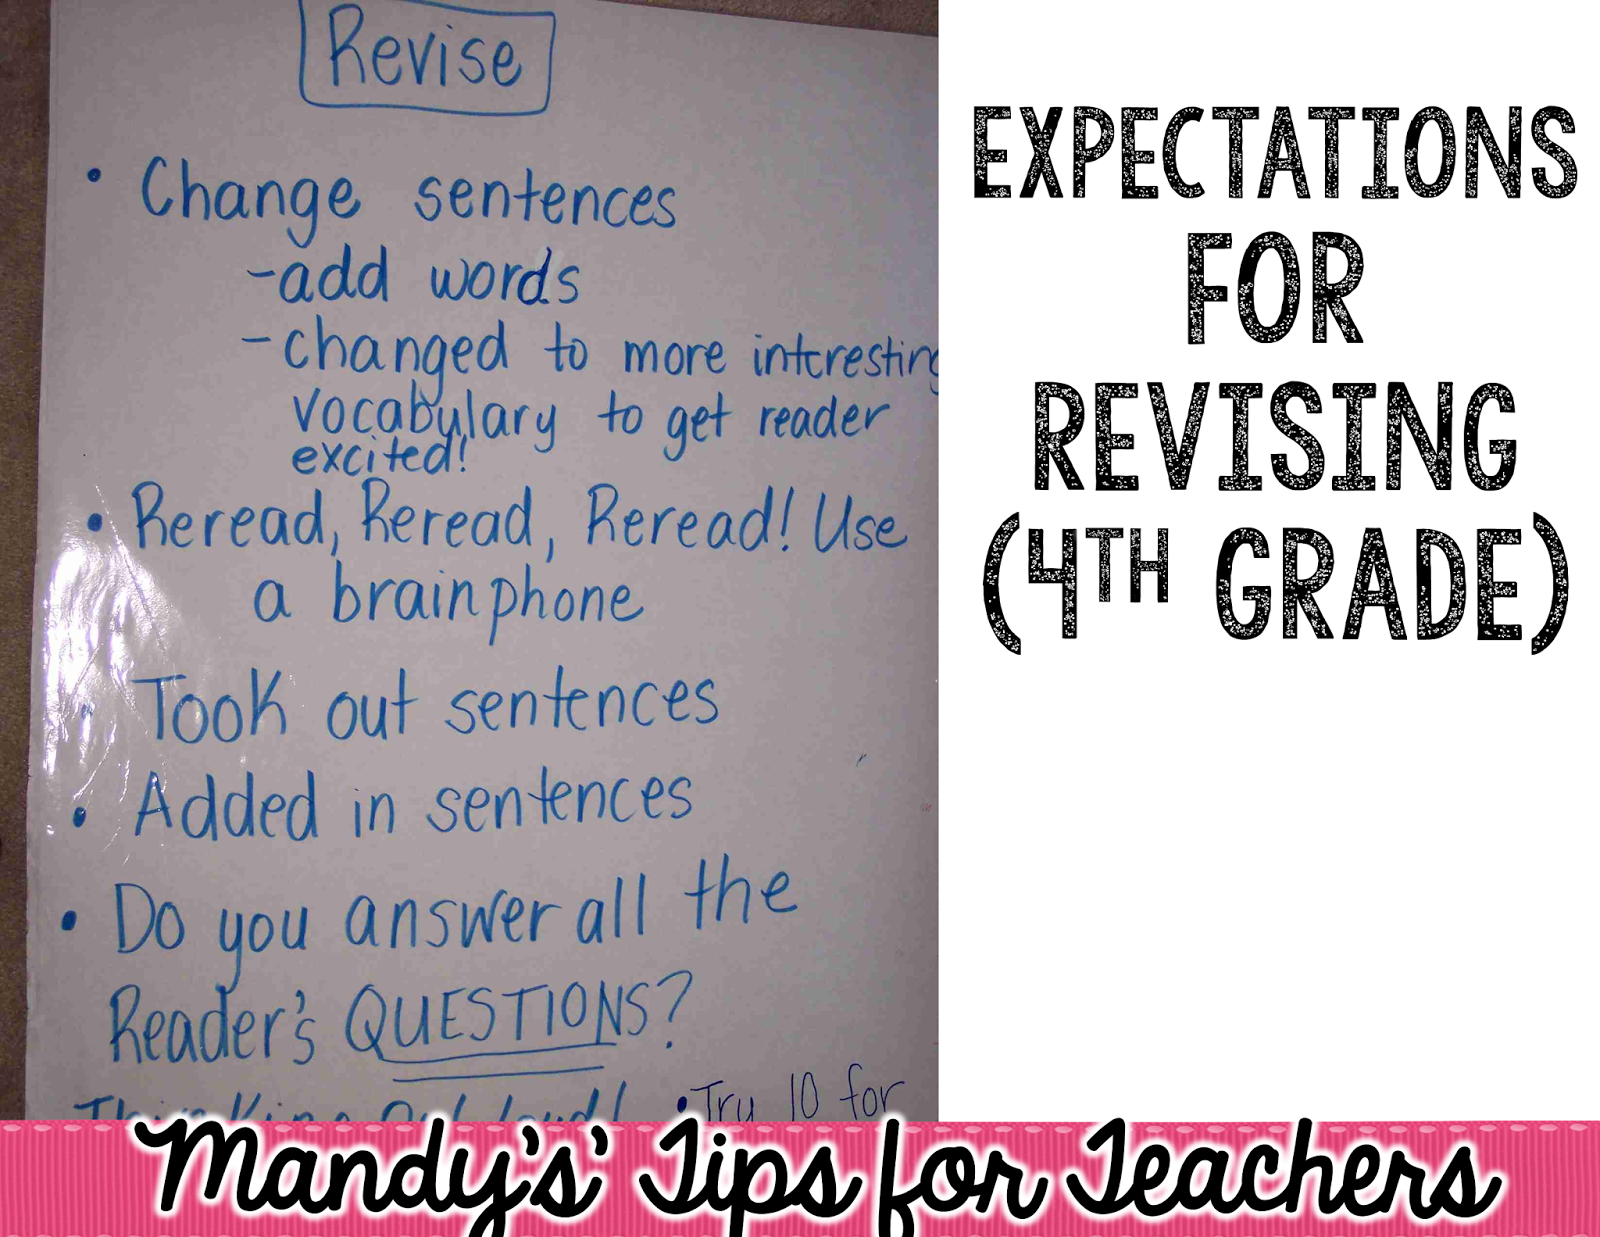 Revise And Edit Anchor Chart